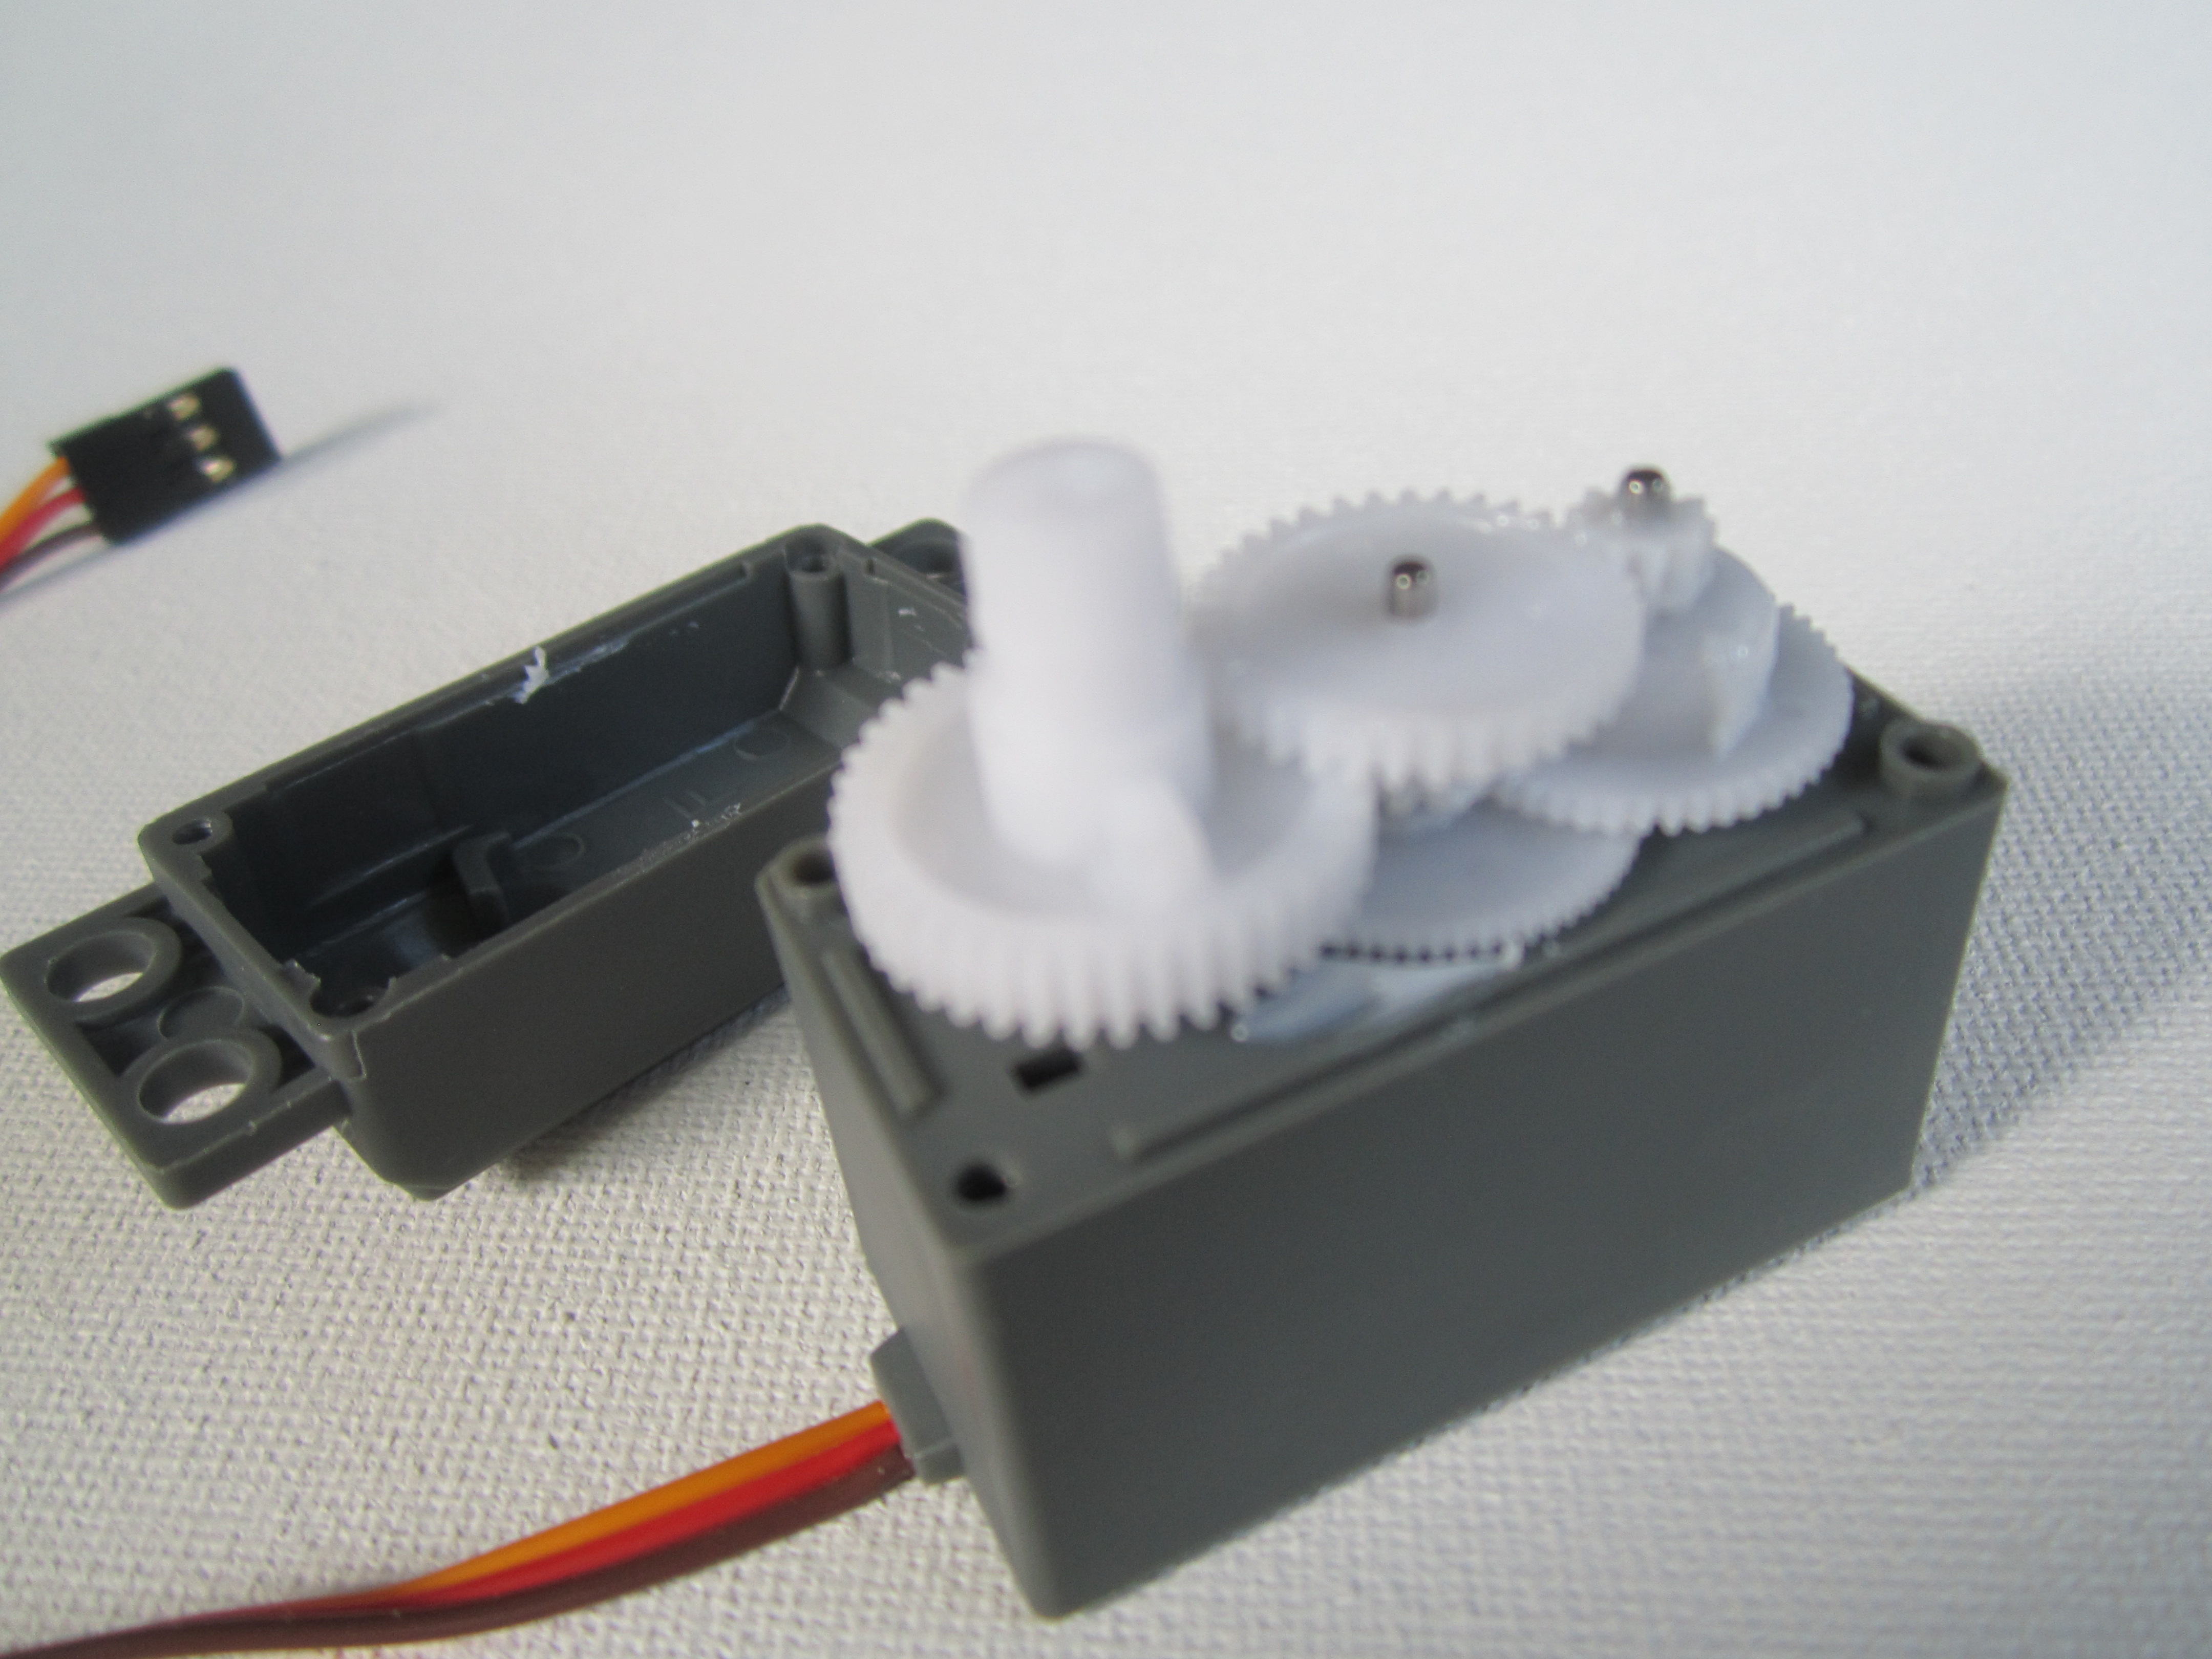 Simple Hack to Make an Adjustable Continuous Rotation Servo